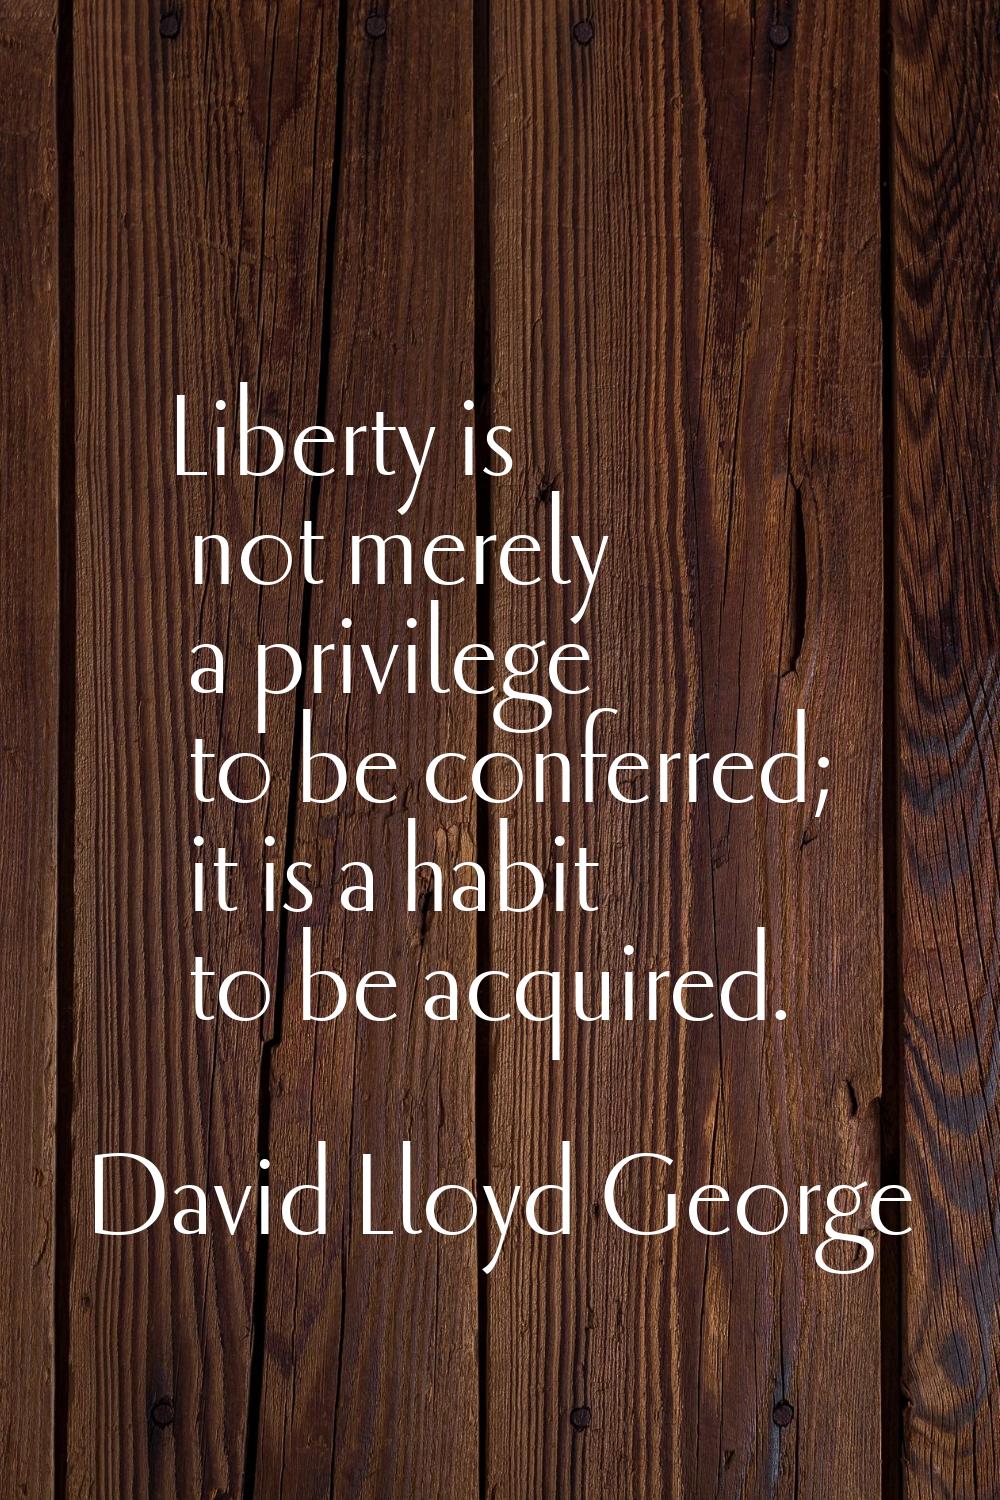 Liberty is not merely a privilege to be conferred; it is a habit to be acquired.